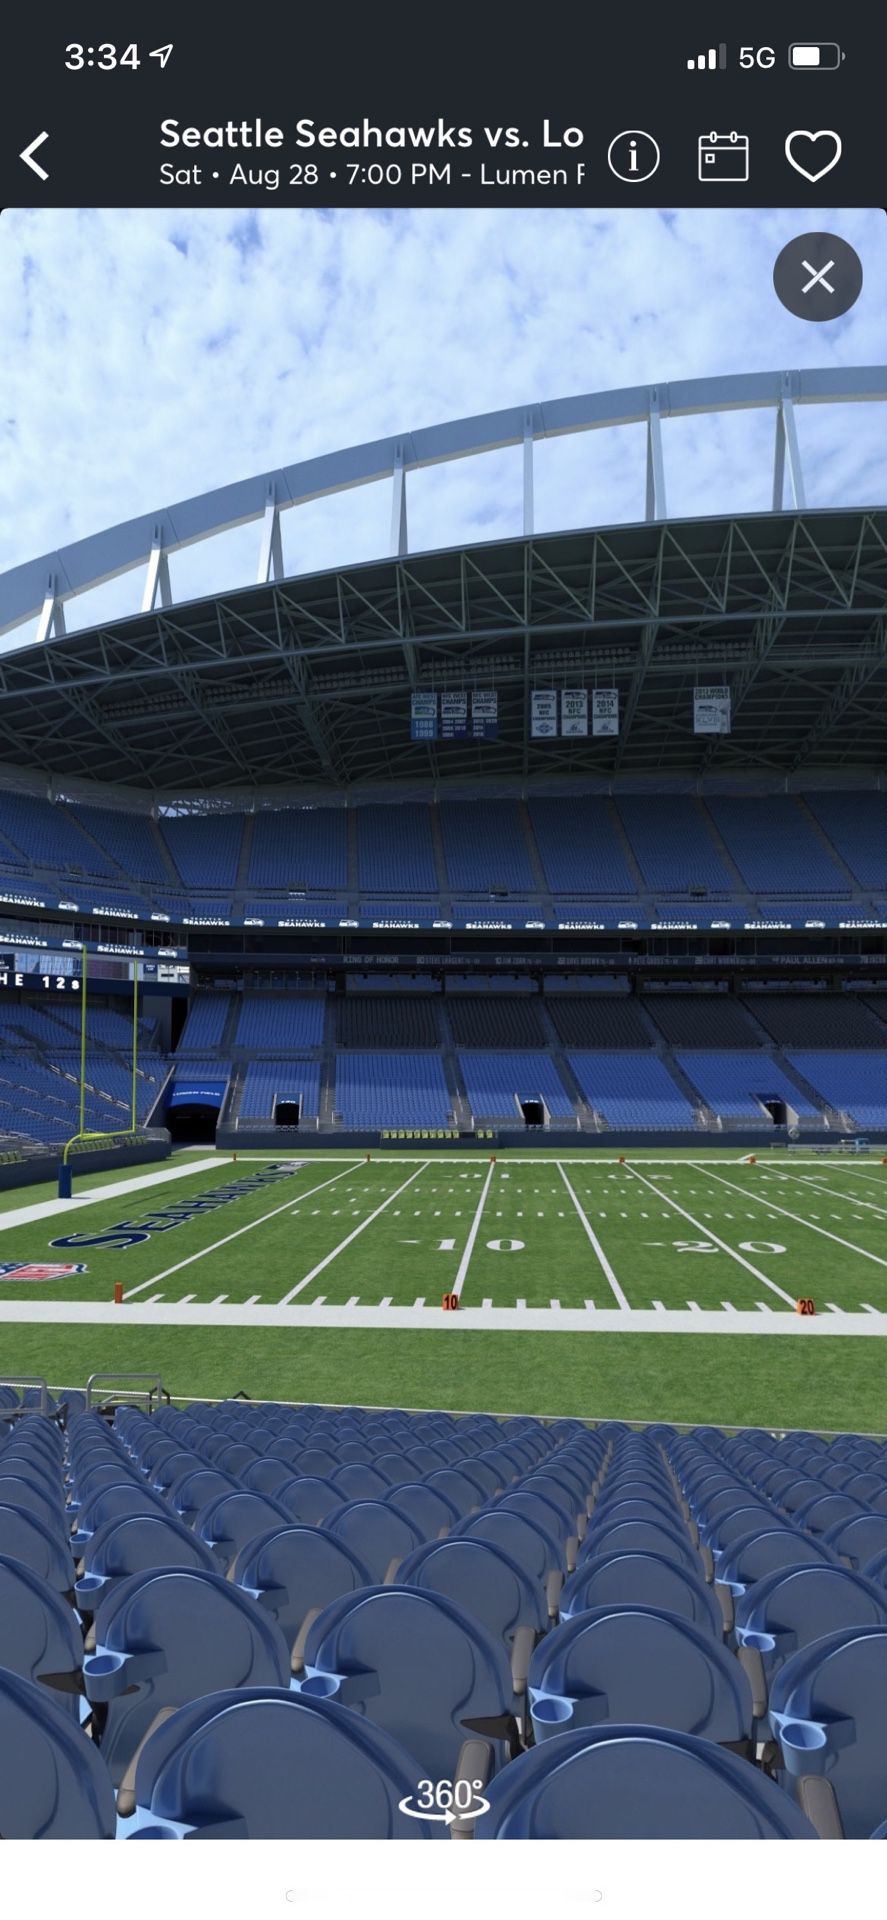 Seahawks tickets seats 17 and 18 available